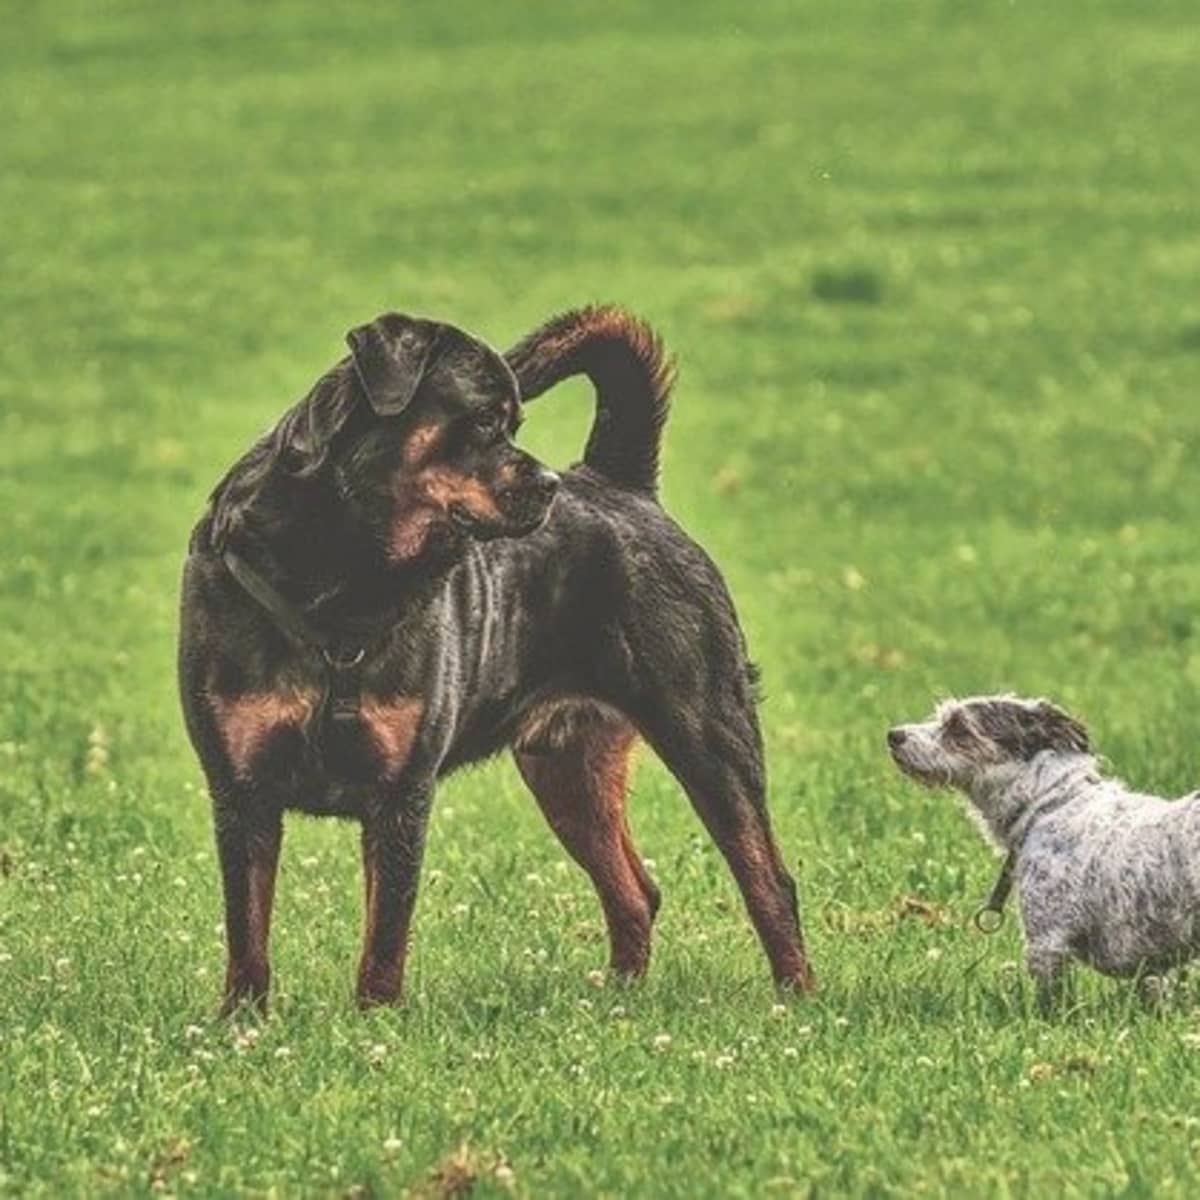 can rottweilers get along with other dogs?